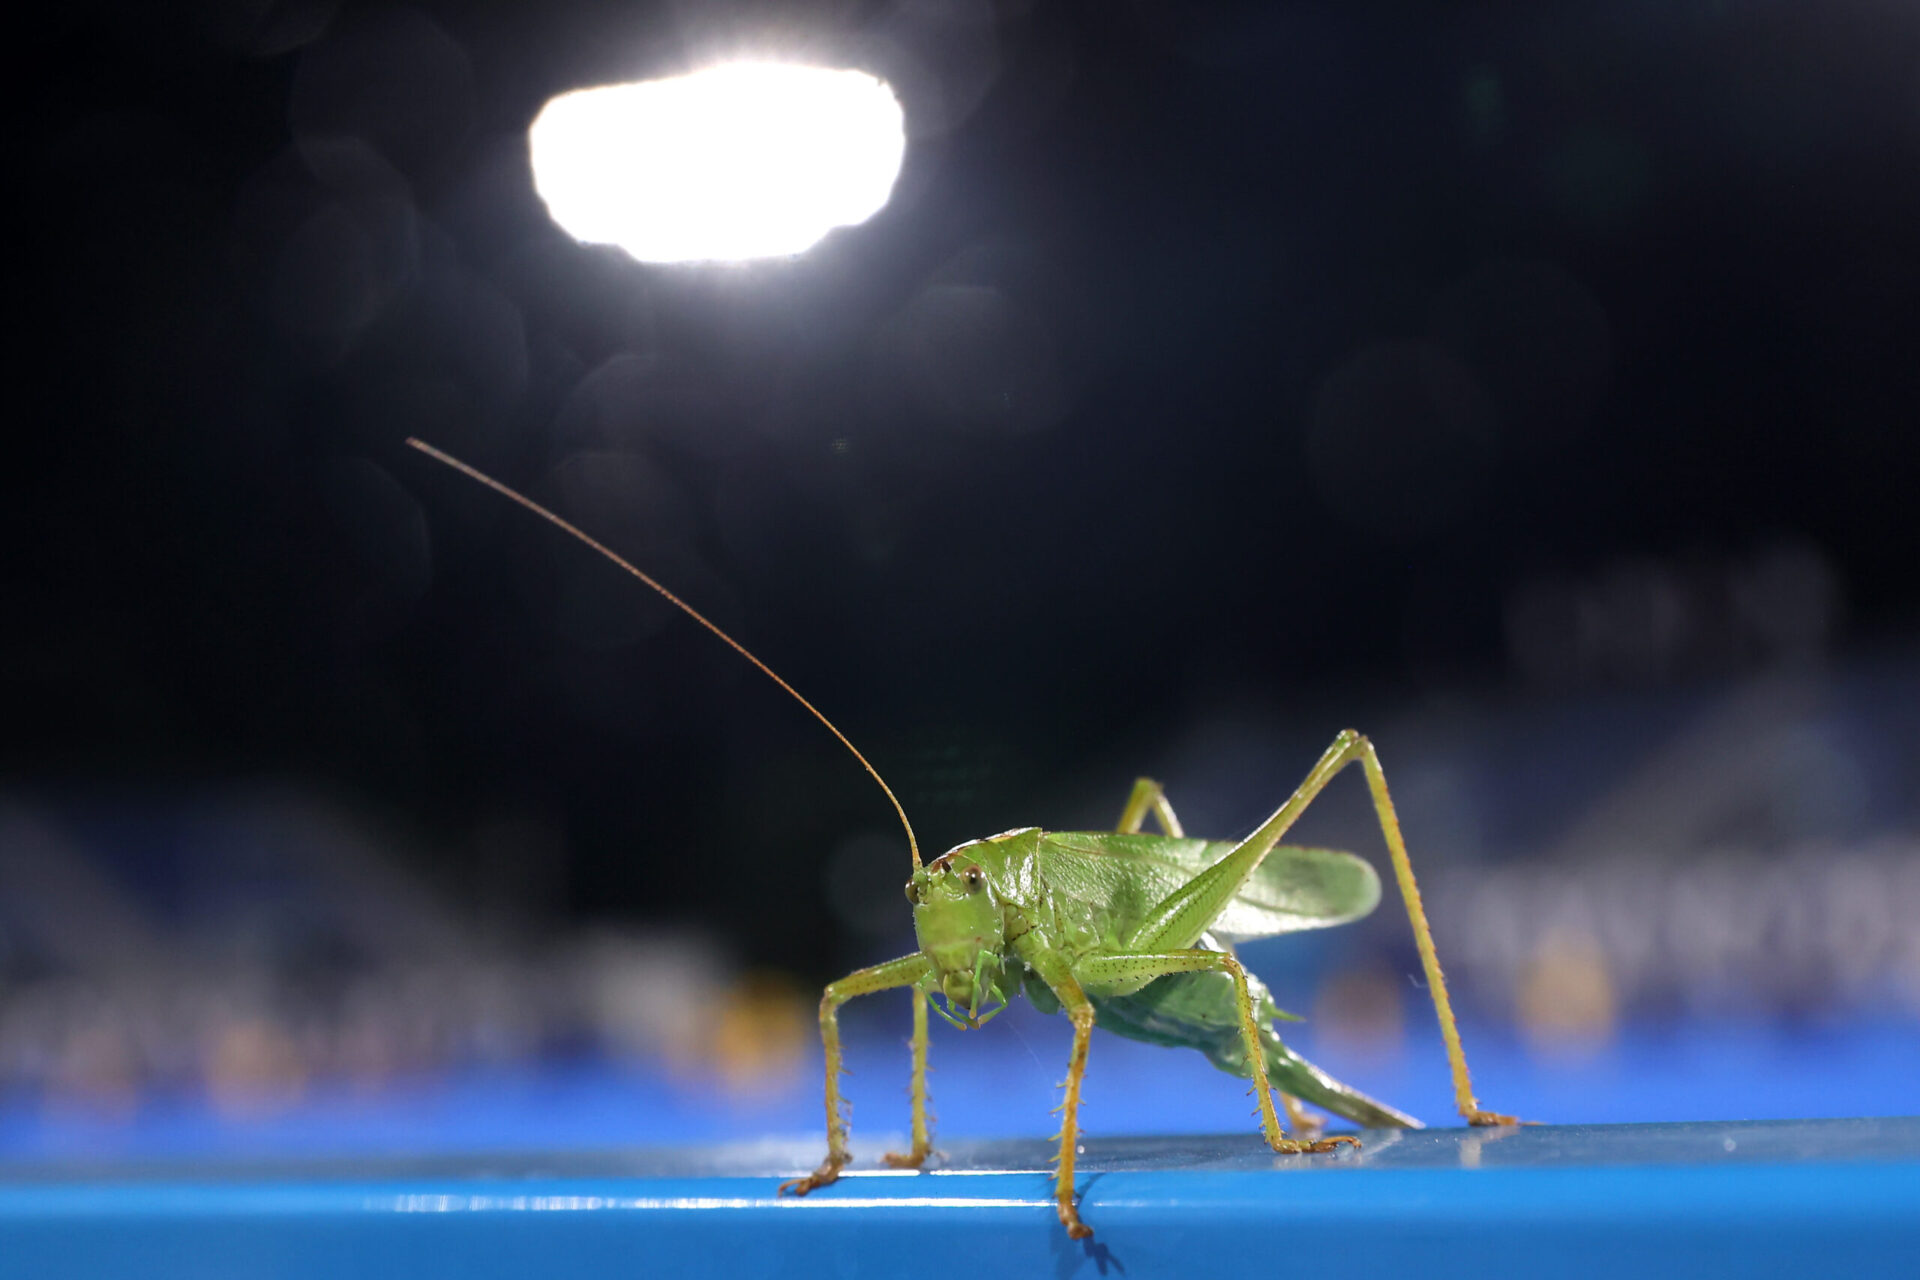 The photo features a grasshopper. Grasshoppers are becoming an issue now, which has led to several ...